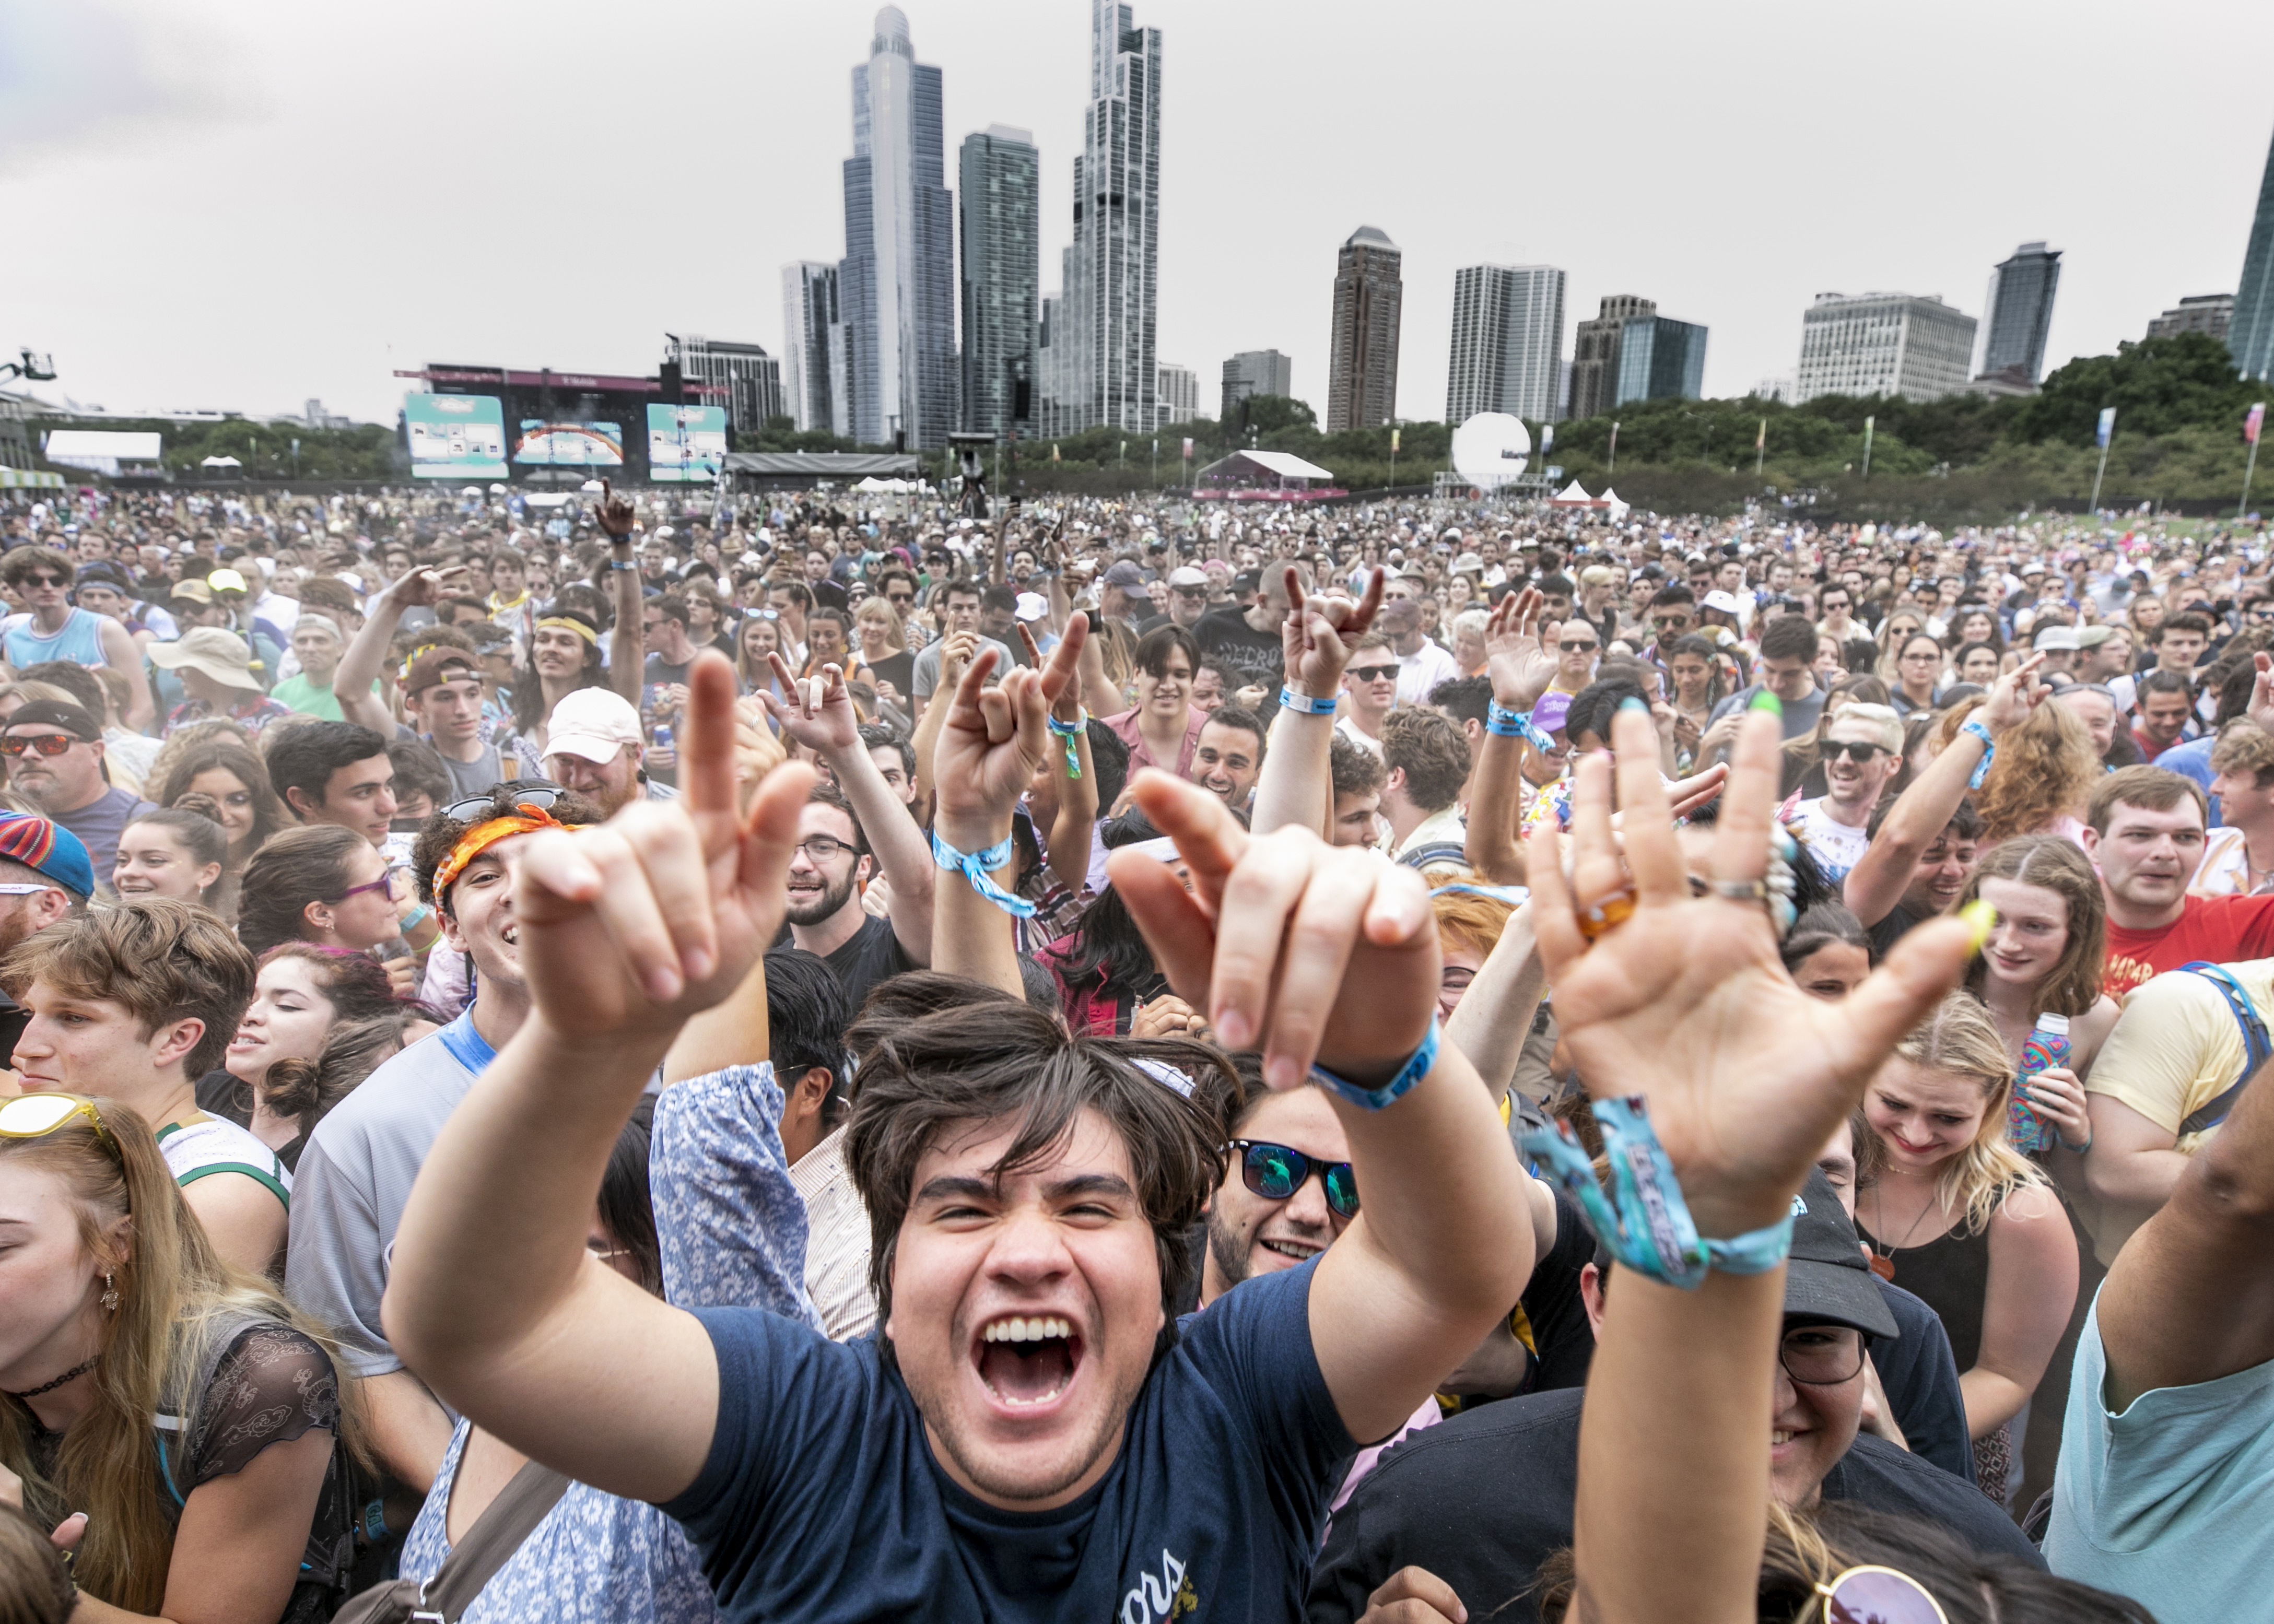 Festivalgoers attend day 2 of Lollapalooza at Grant Park in Chicago, on July 30, 2021. (Scott Legato—Getty Images)